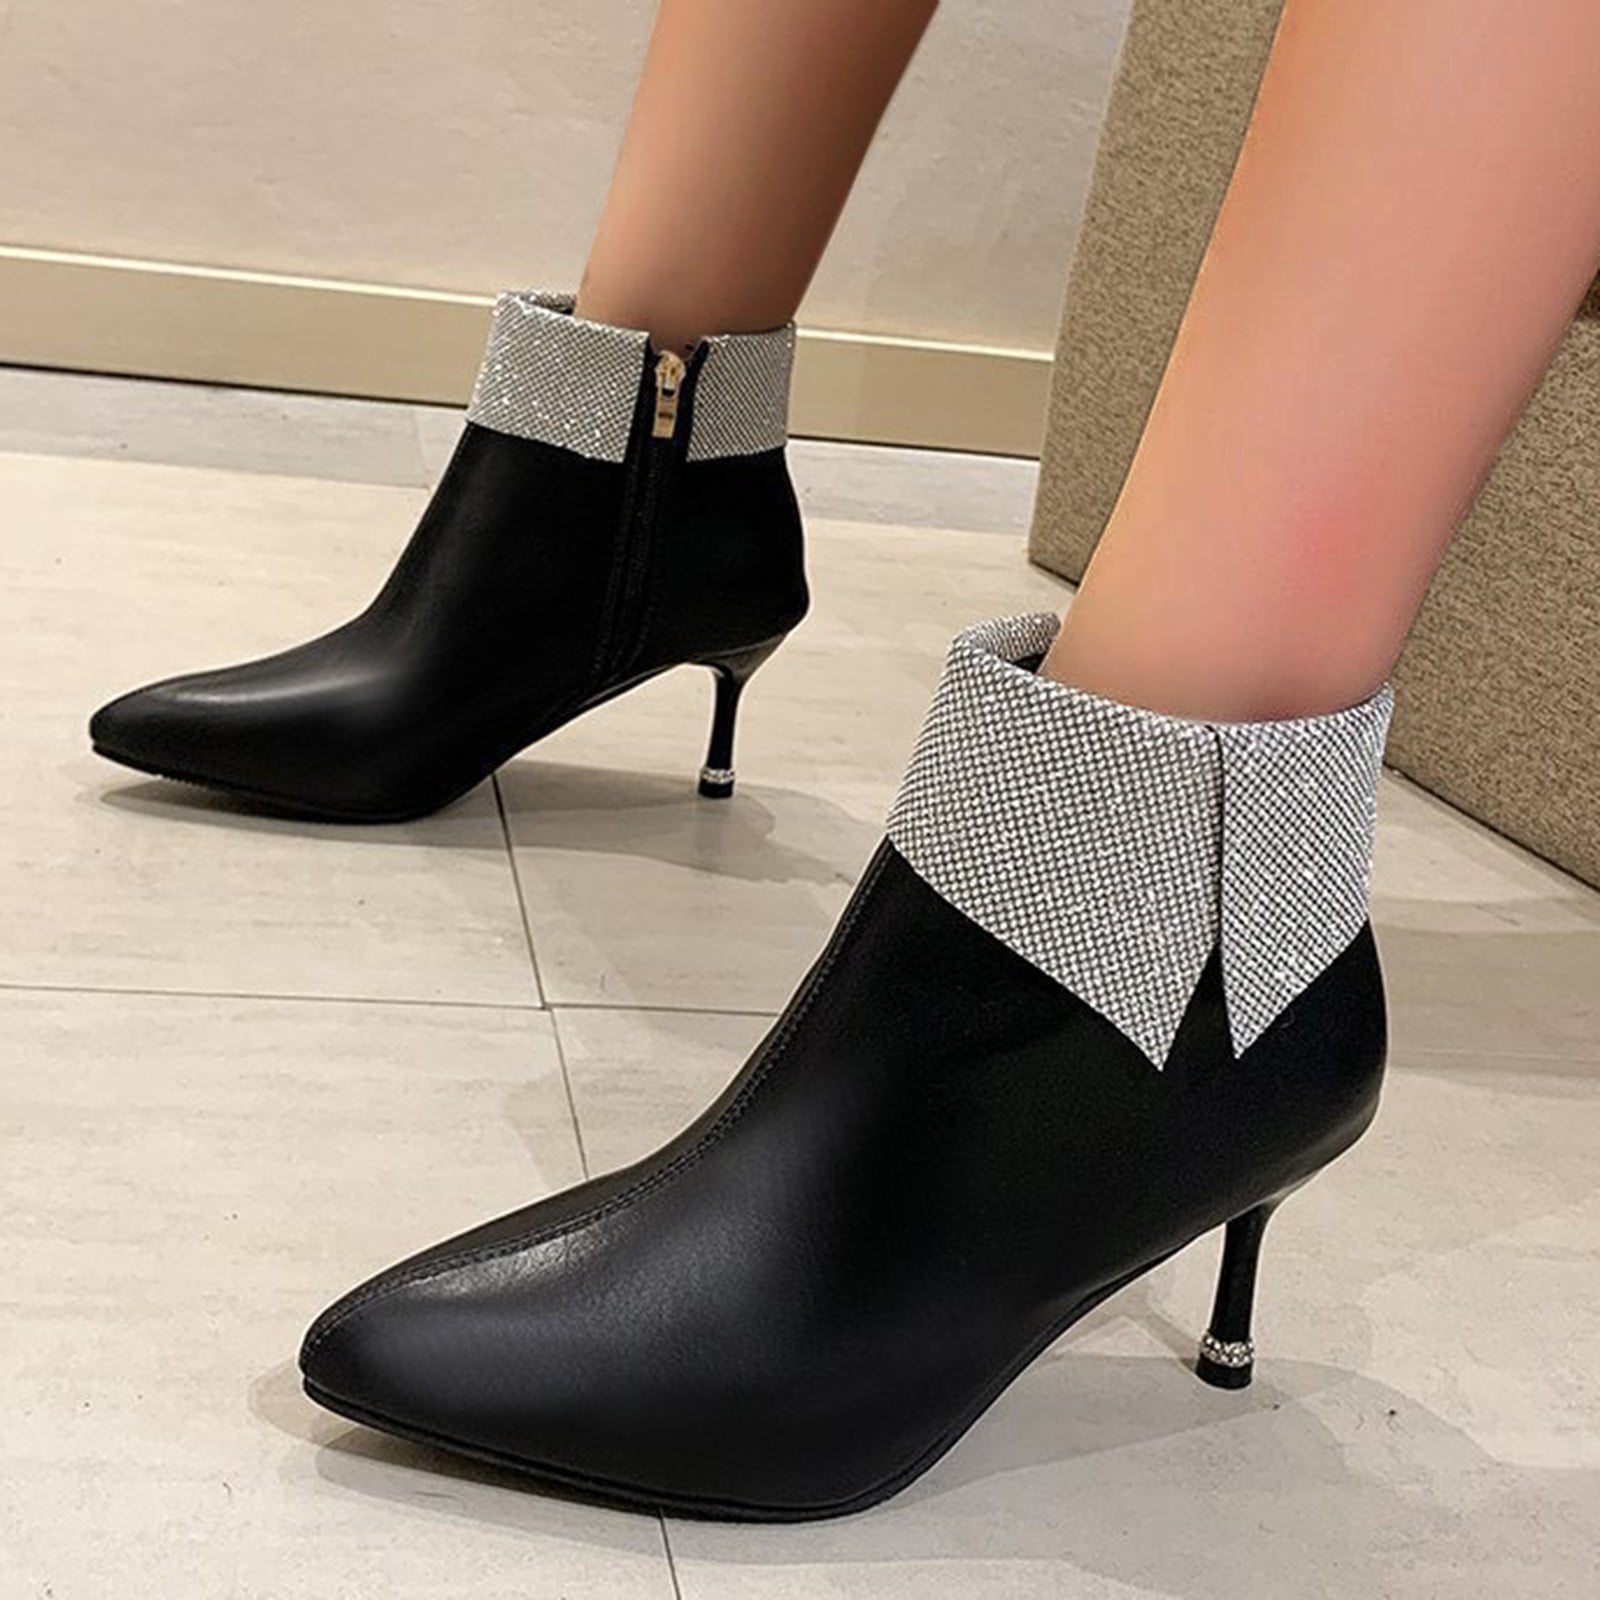 Details about   Winter Warm Women's Stylish Pointed Toes High Heels Bow Tie PU Ankle Boots 